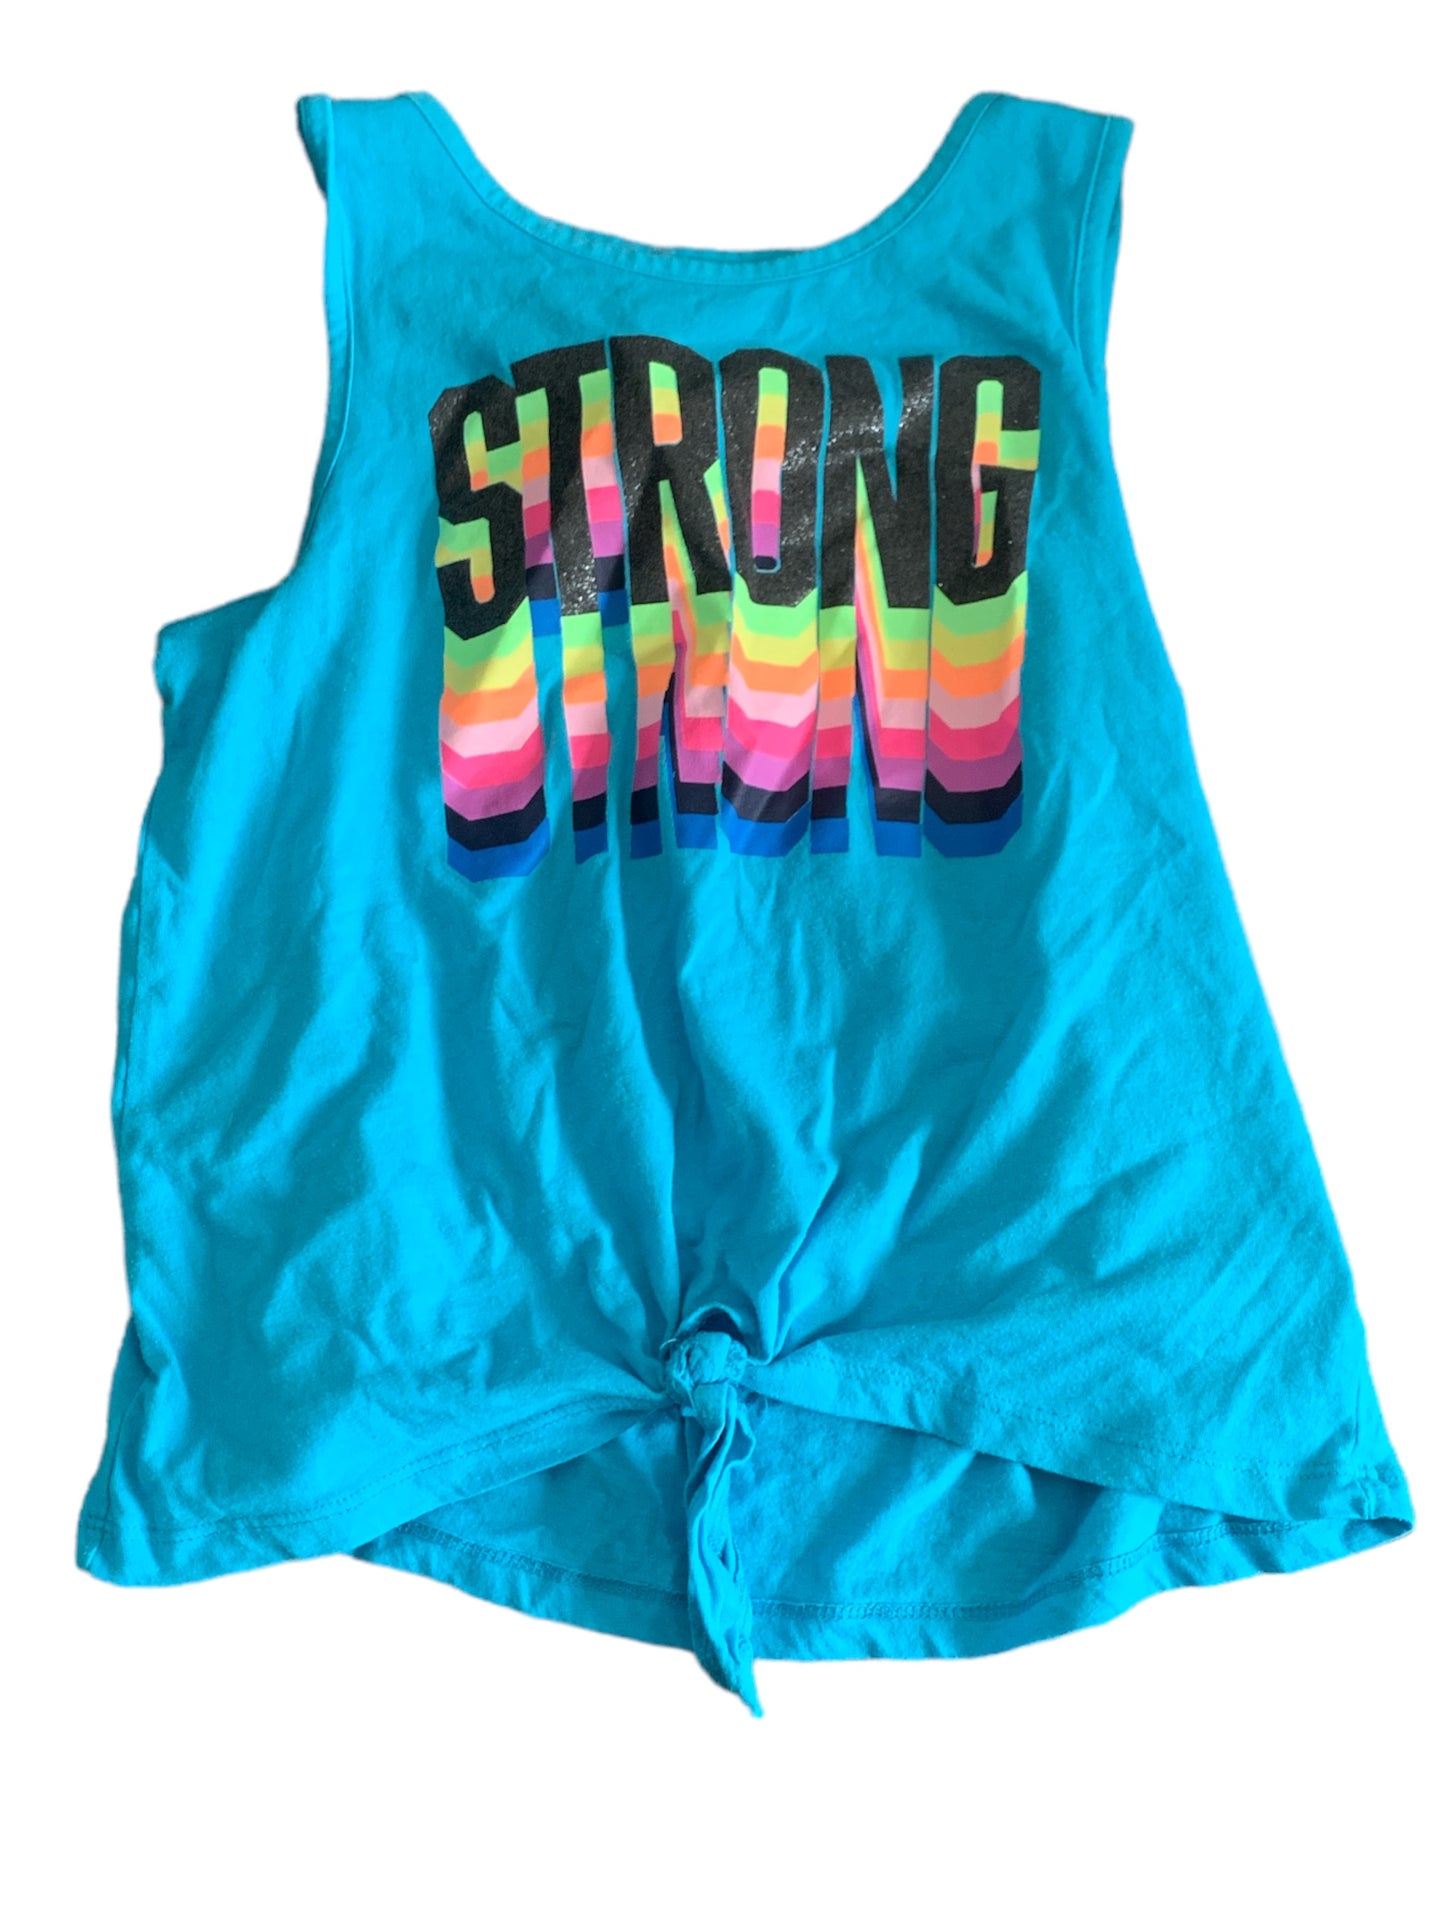 Strong Tank Top Size 12-14